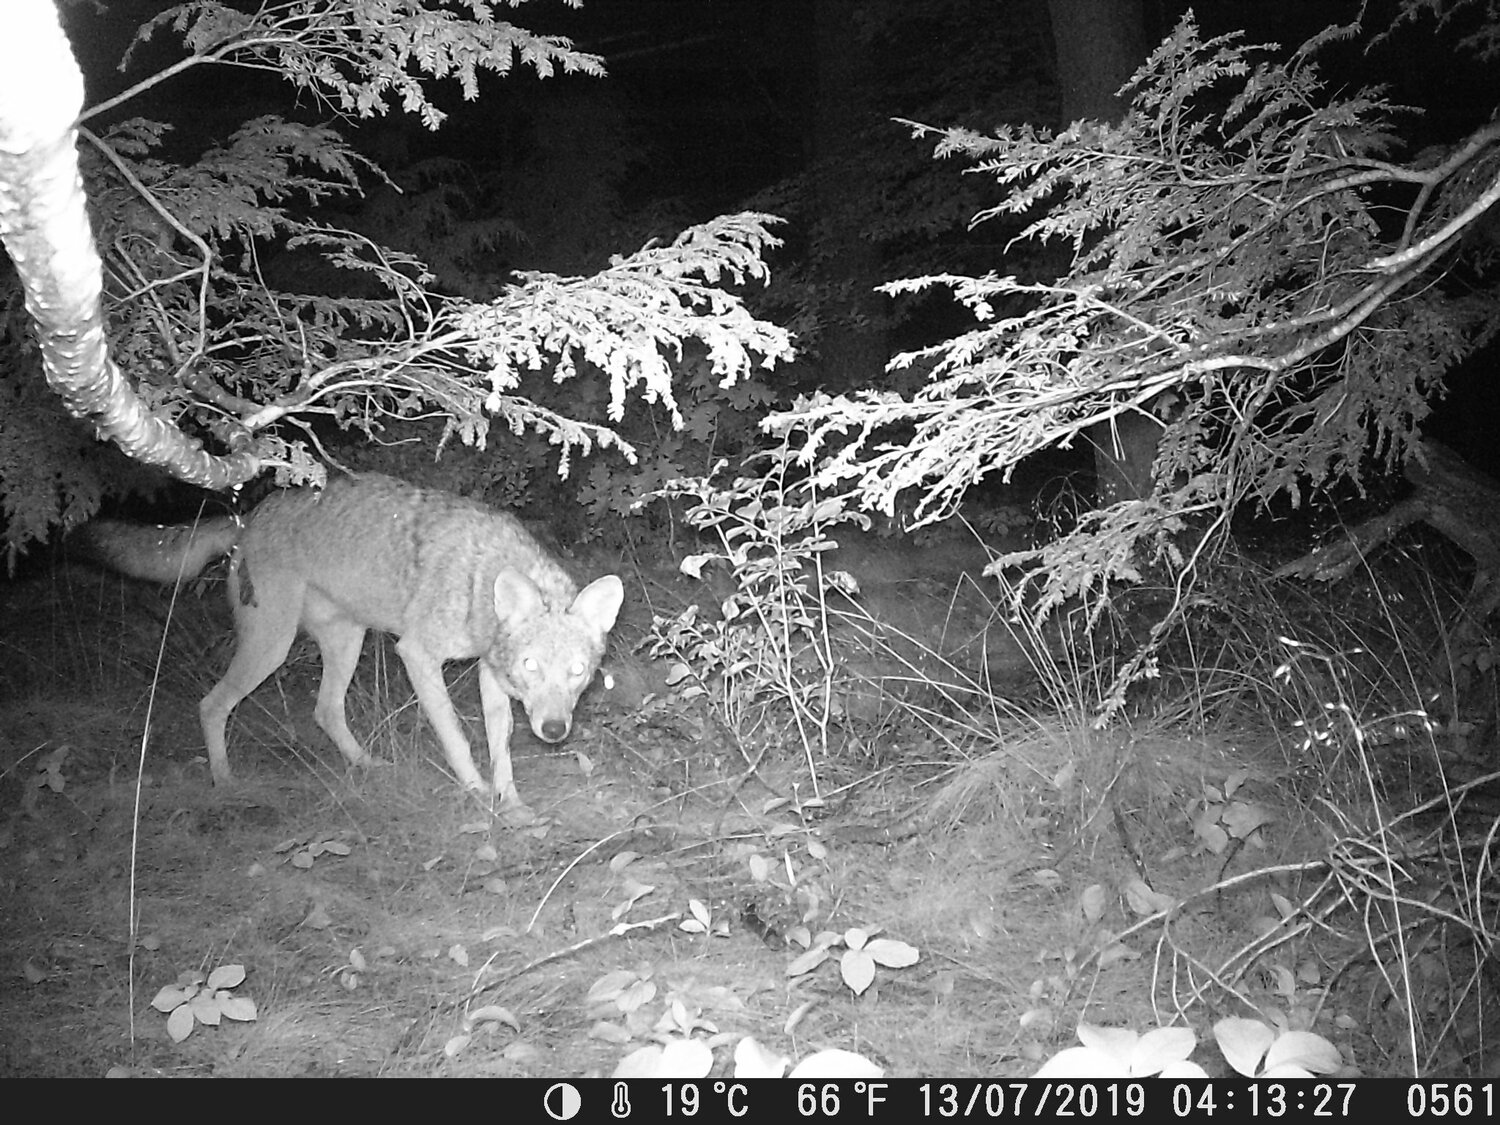 Caught on a night-time trail camera last July from back deck of house on Pine Street backing up to Powder House Reservation. 